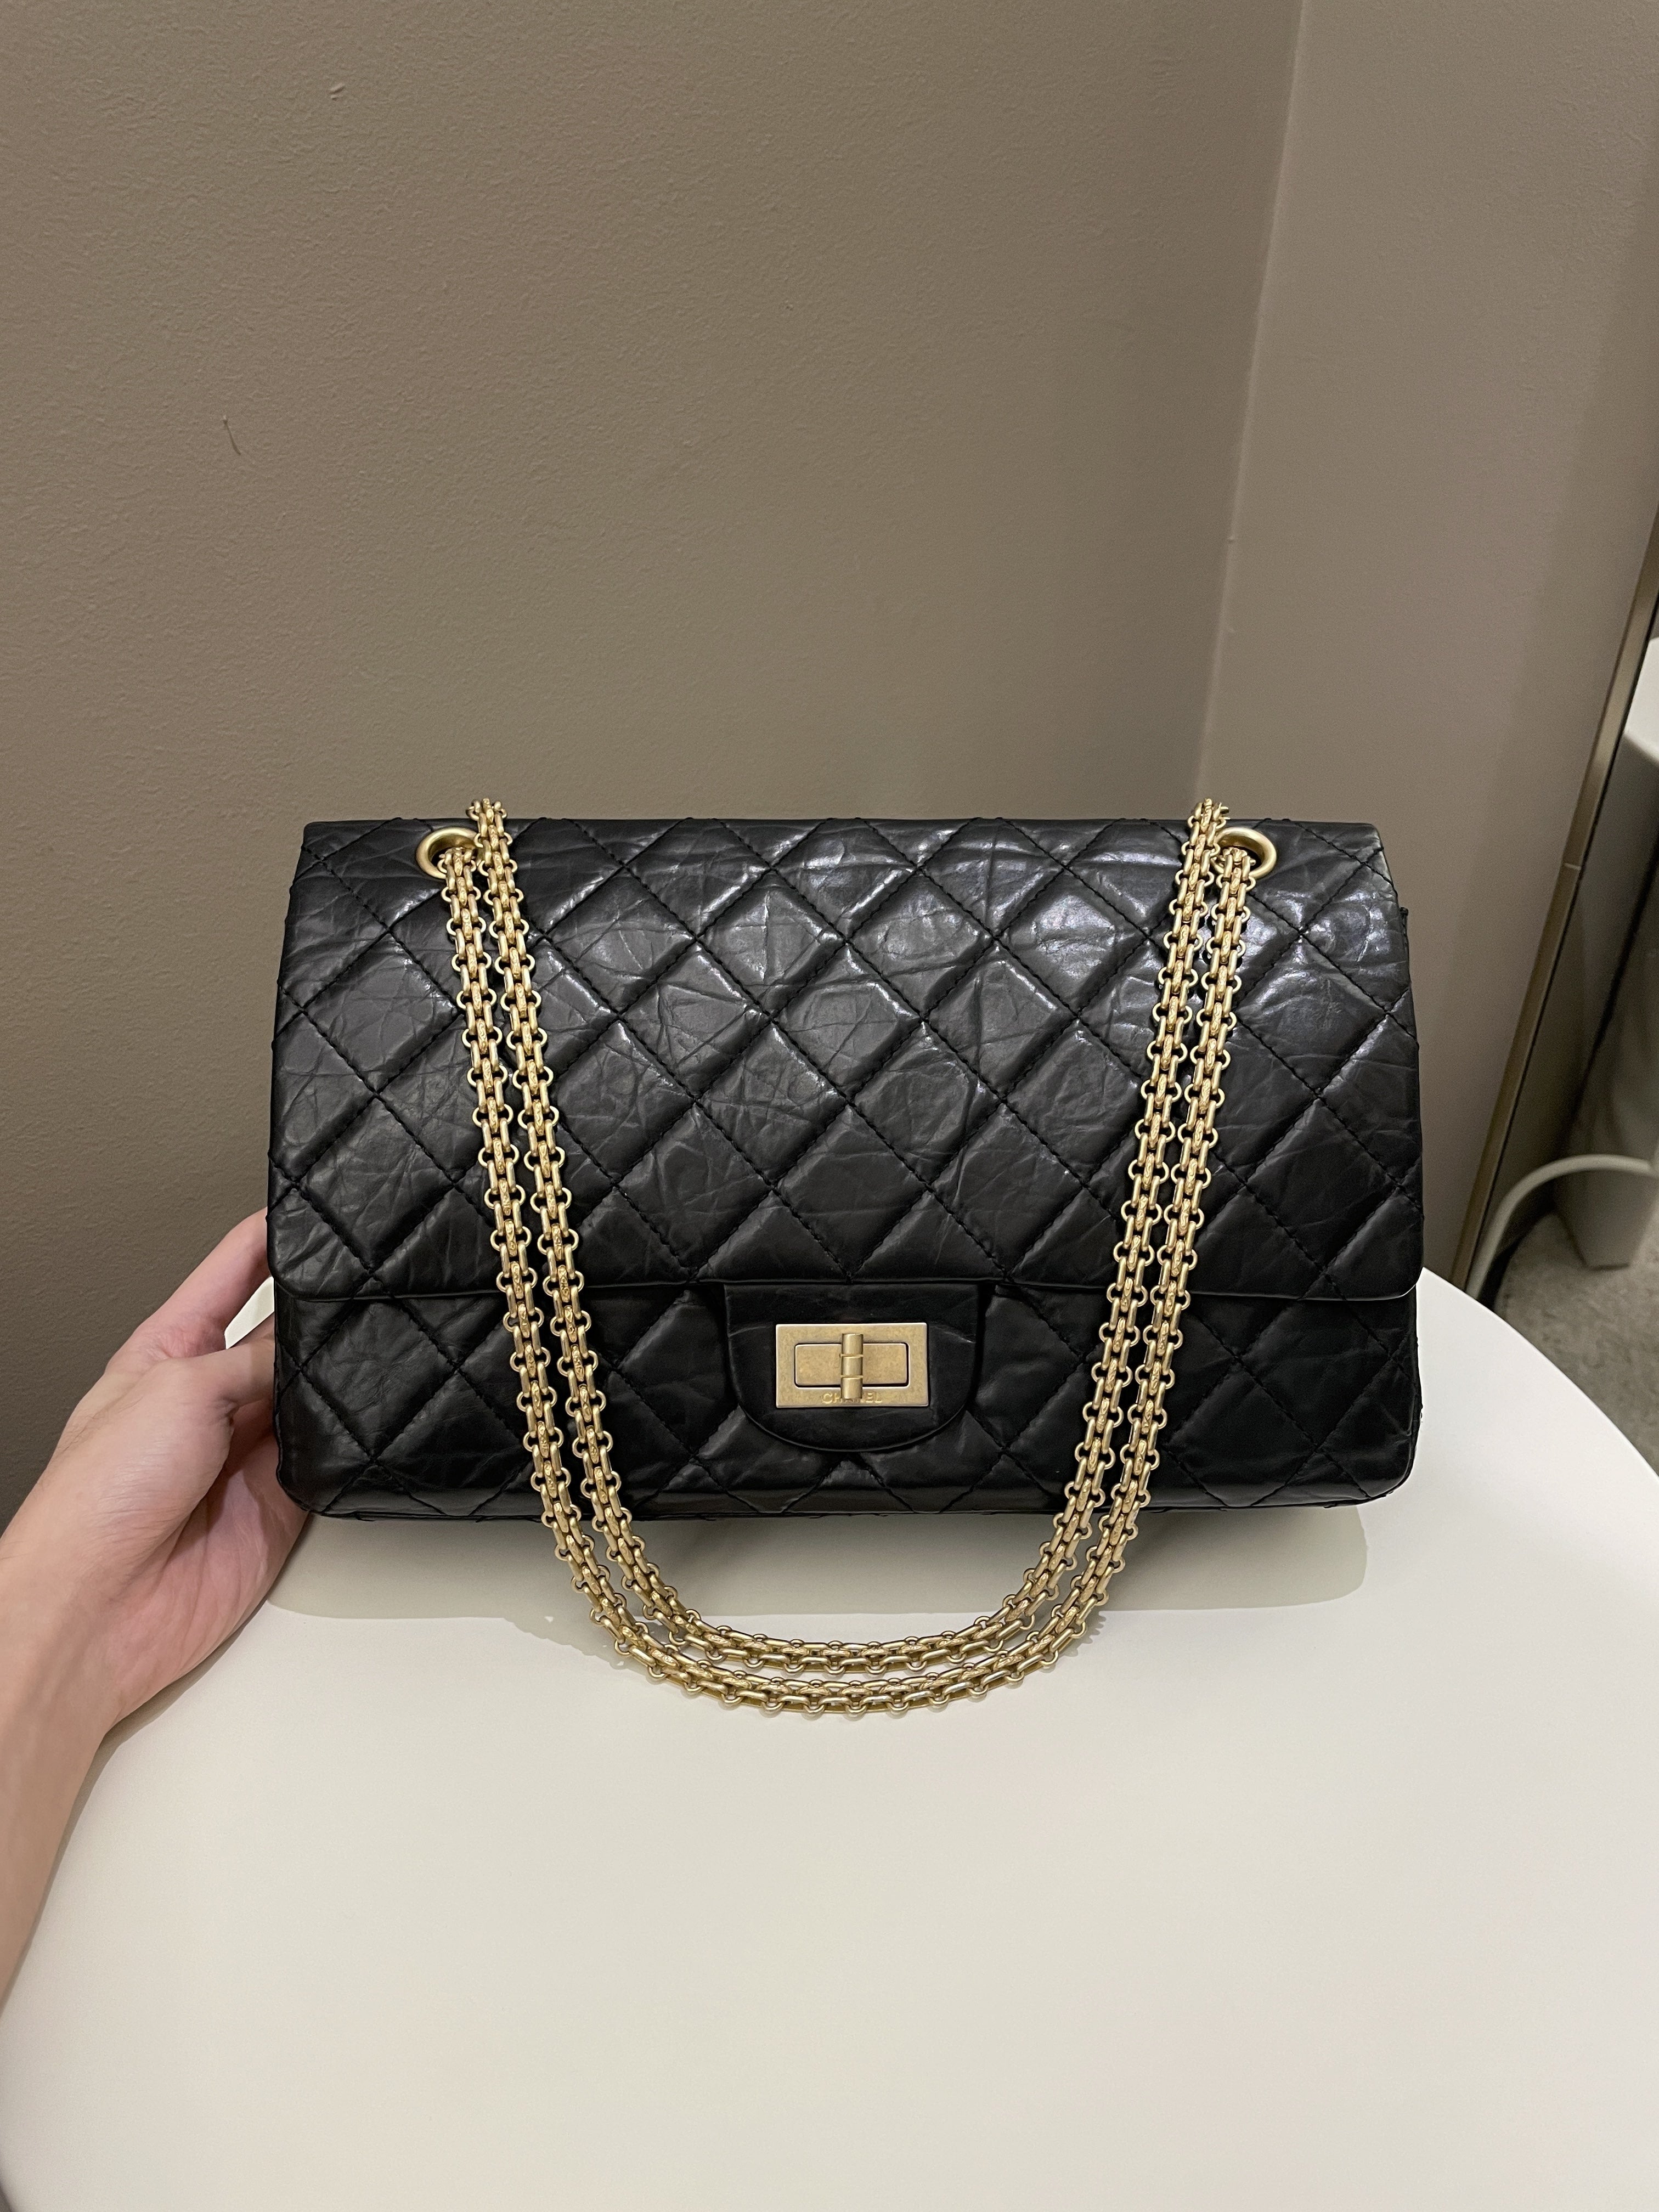 Chanel 2.55 227 Quilted Reissue Double Flap Black Aged Calfskin